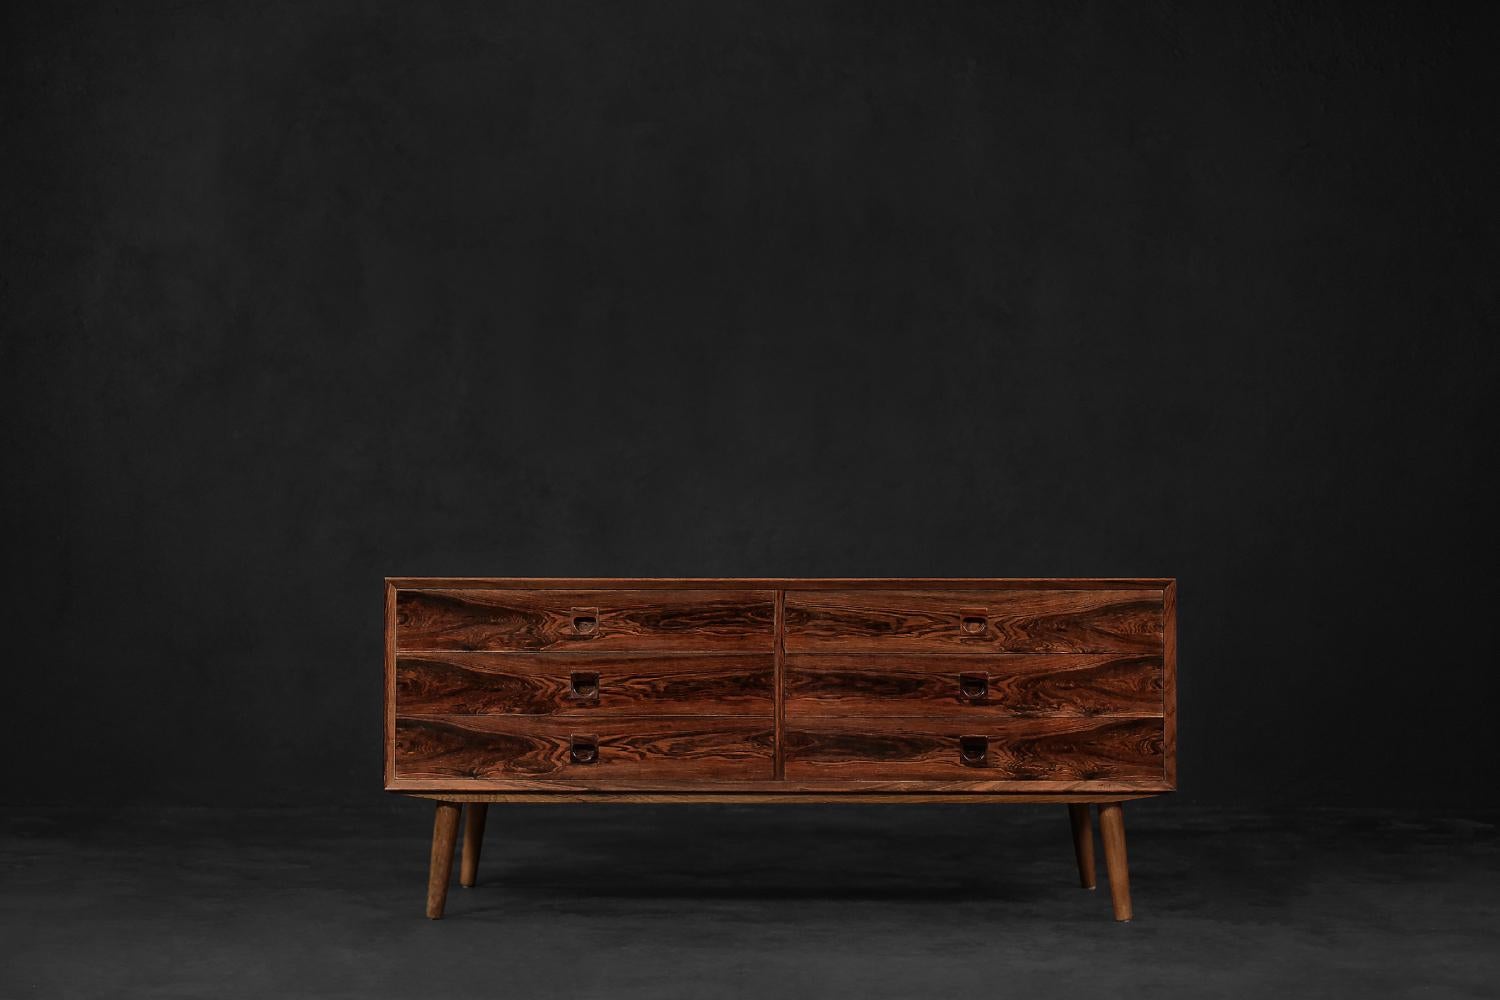 This low chest of drawers was designed during the 1960s by Erik Brouer for the Danish manufacturer Brouer Møbelfabrik. It is finished of precious rosewood wood characterized by rich graining and a deep shade of brown. The cabinet has six wide